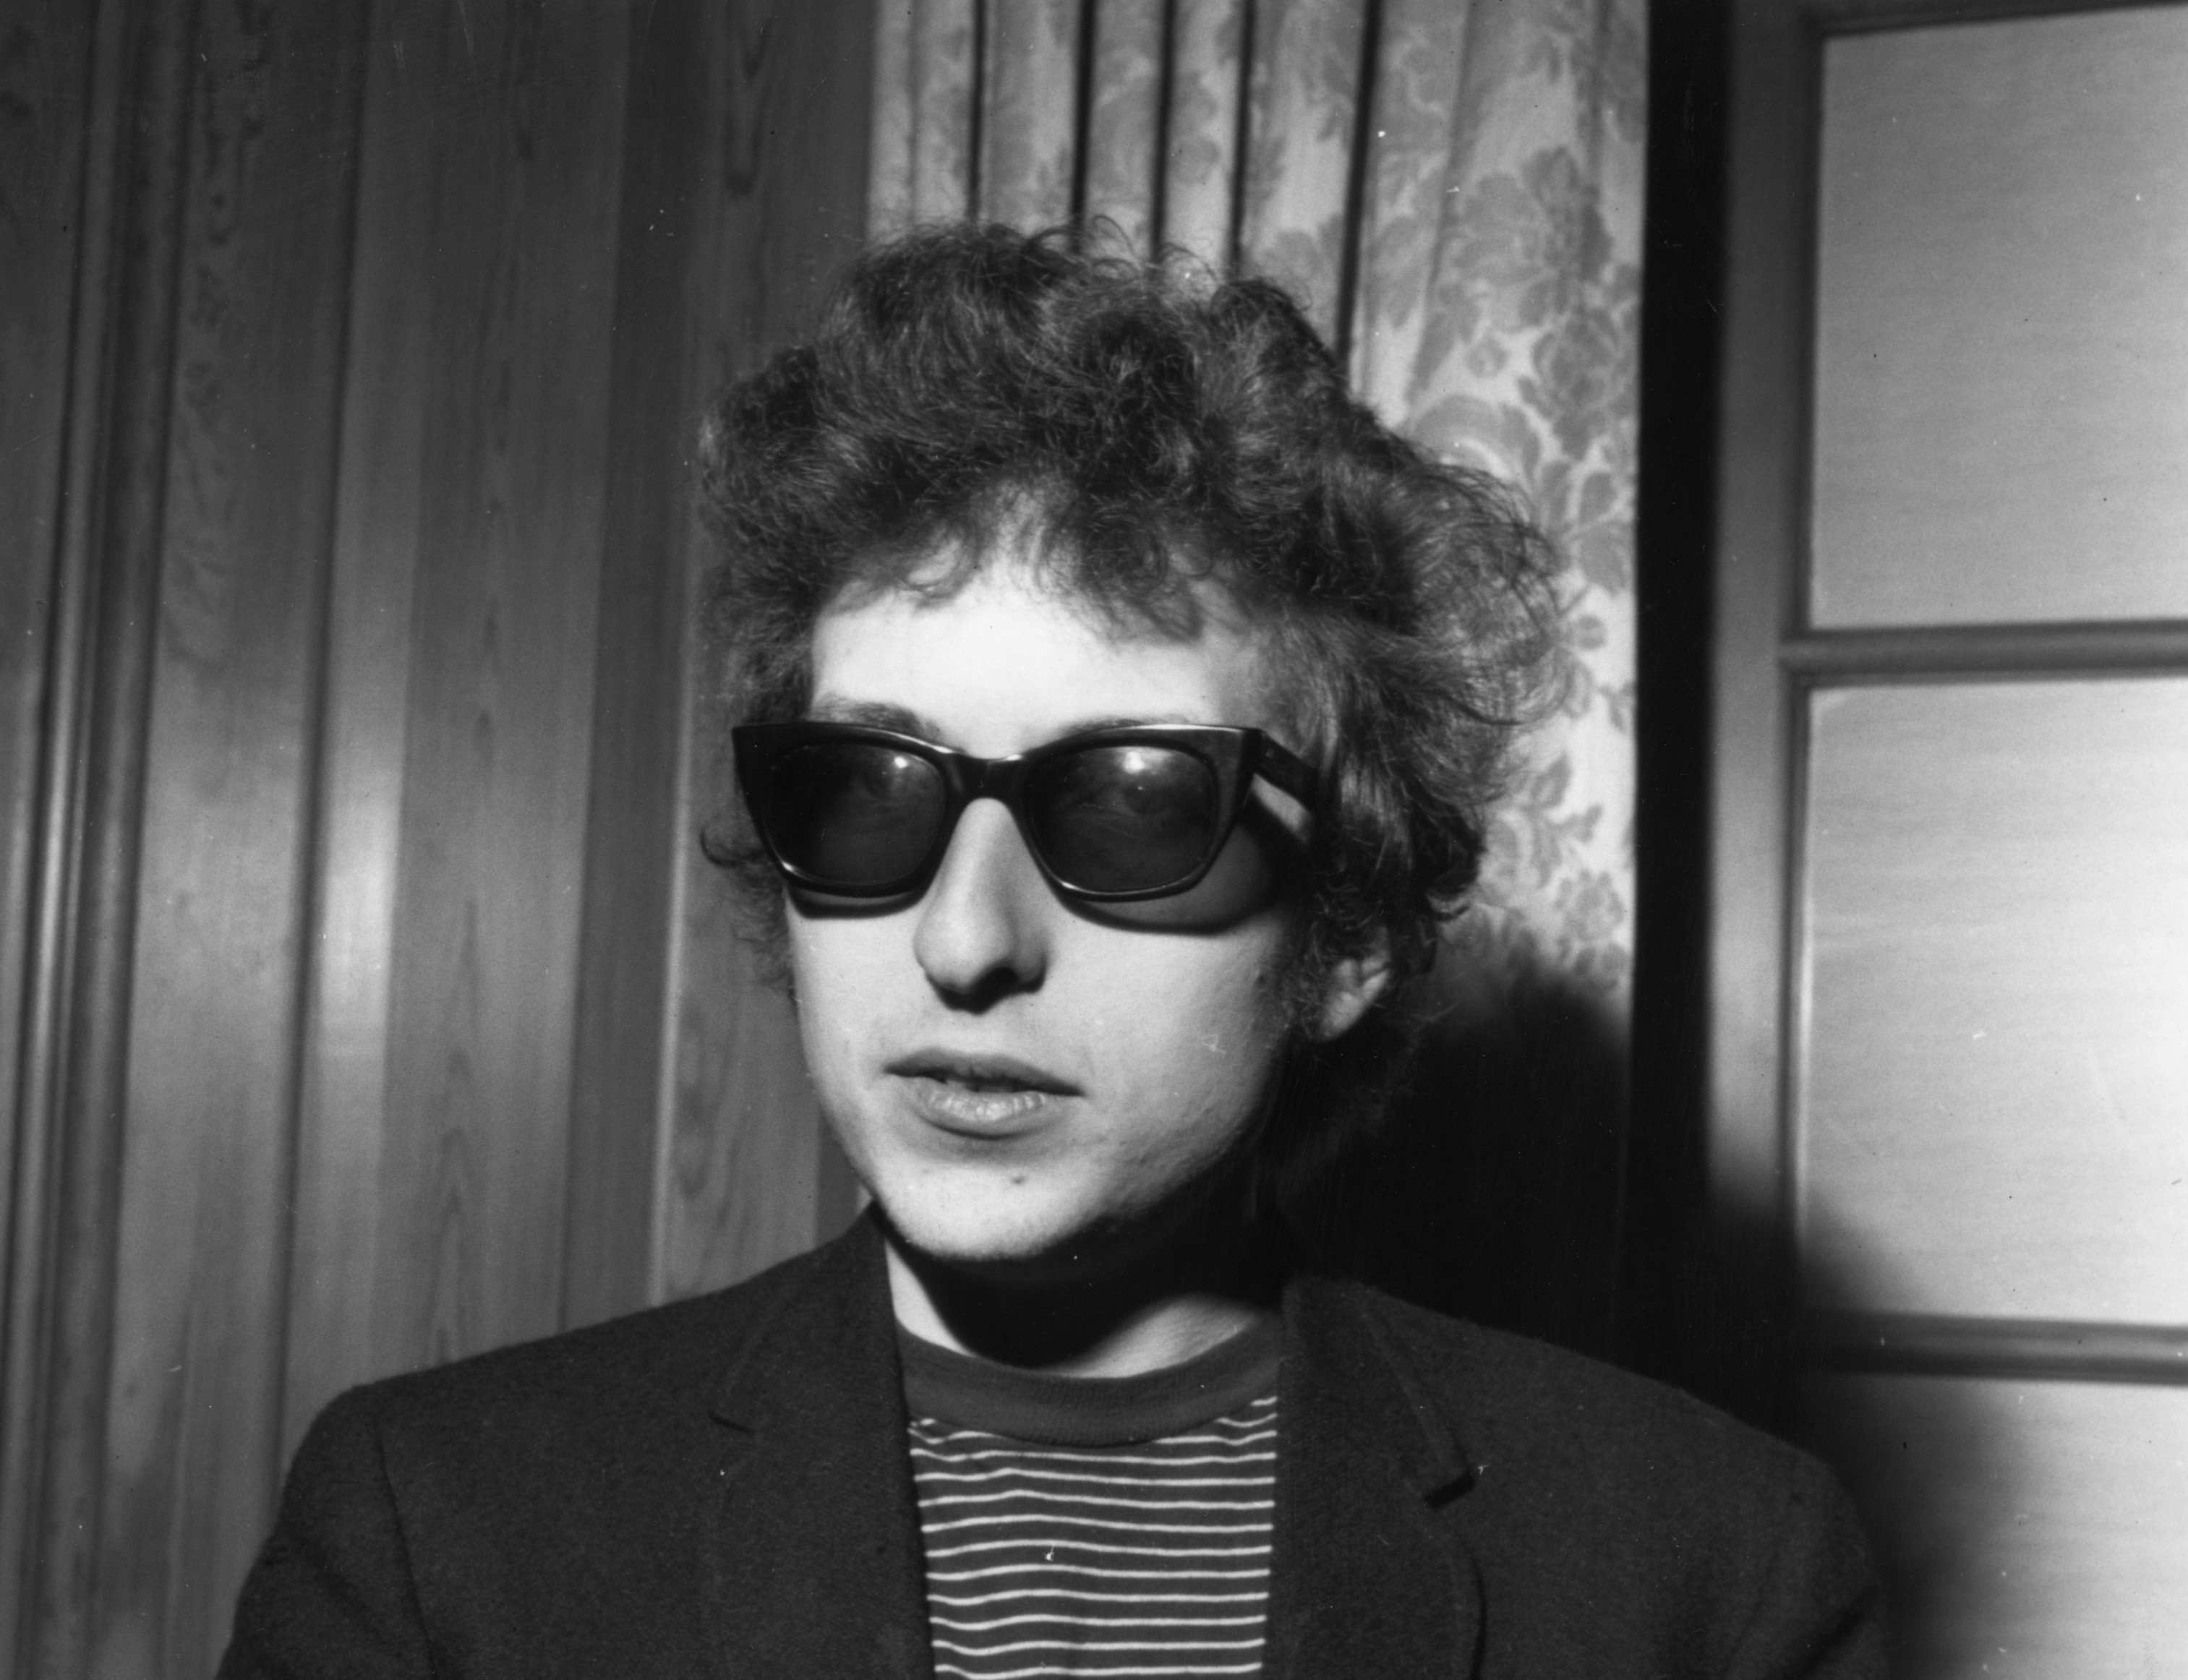 A black and white picture of Bob Dylan wearing sunglasses in front of a window.